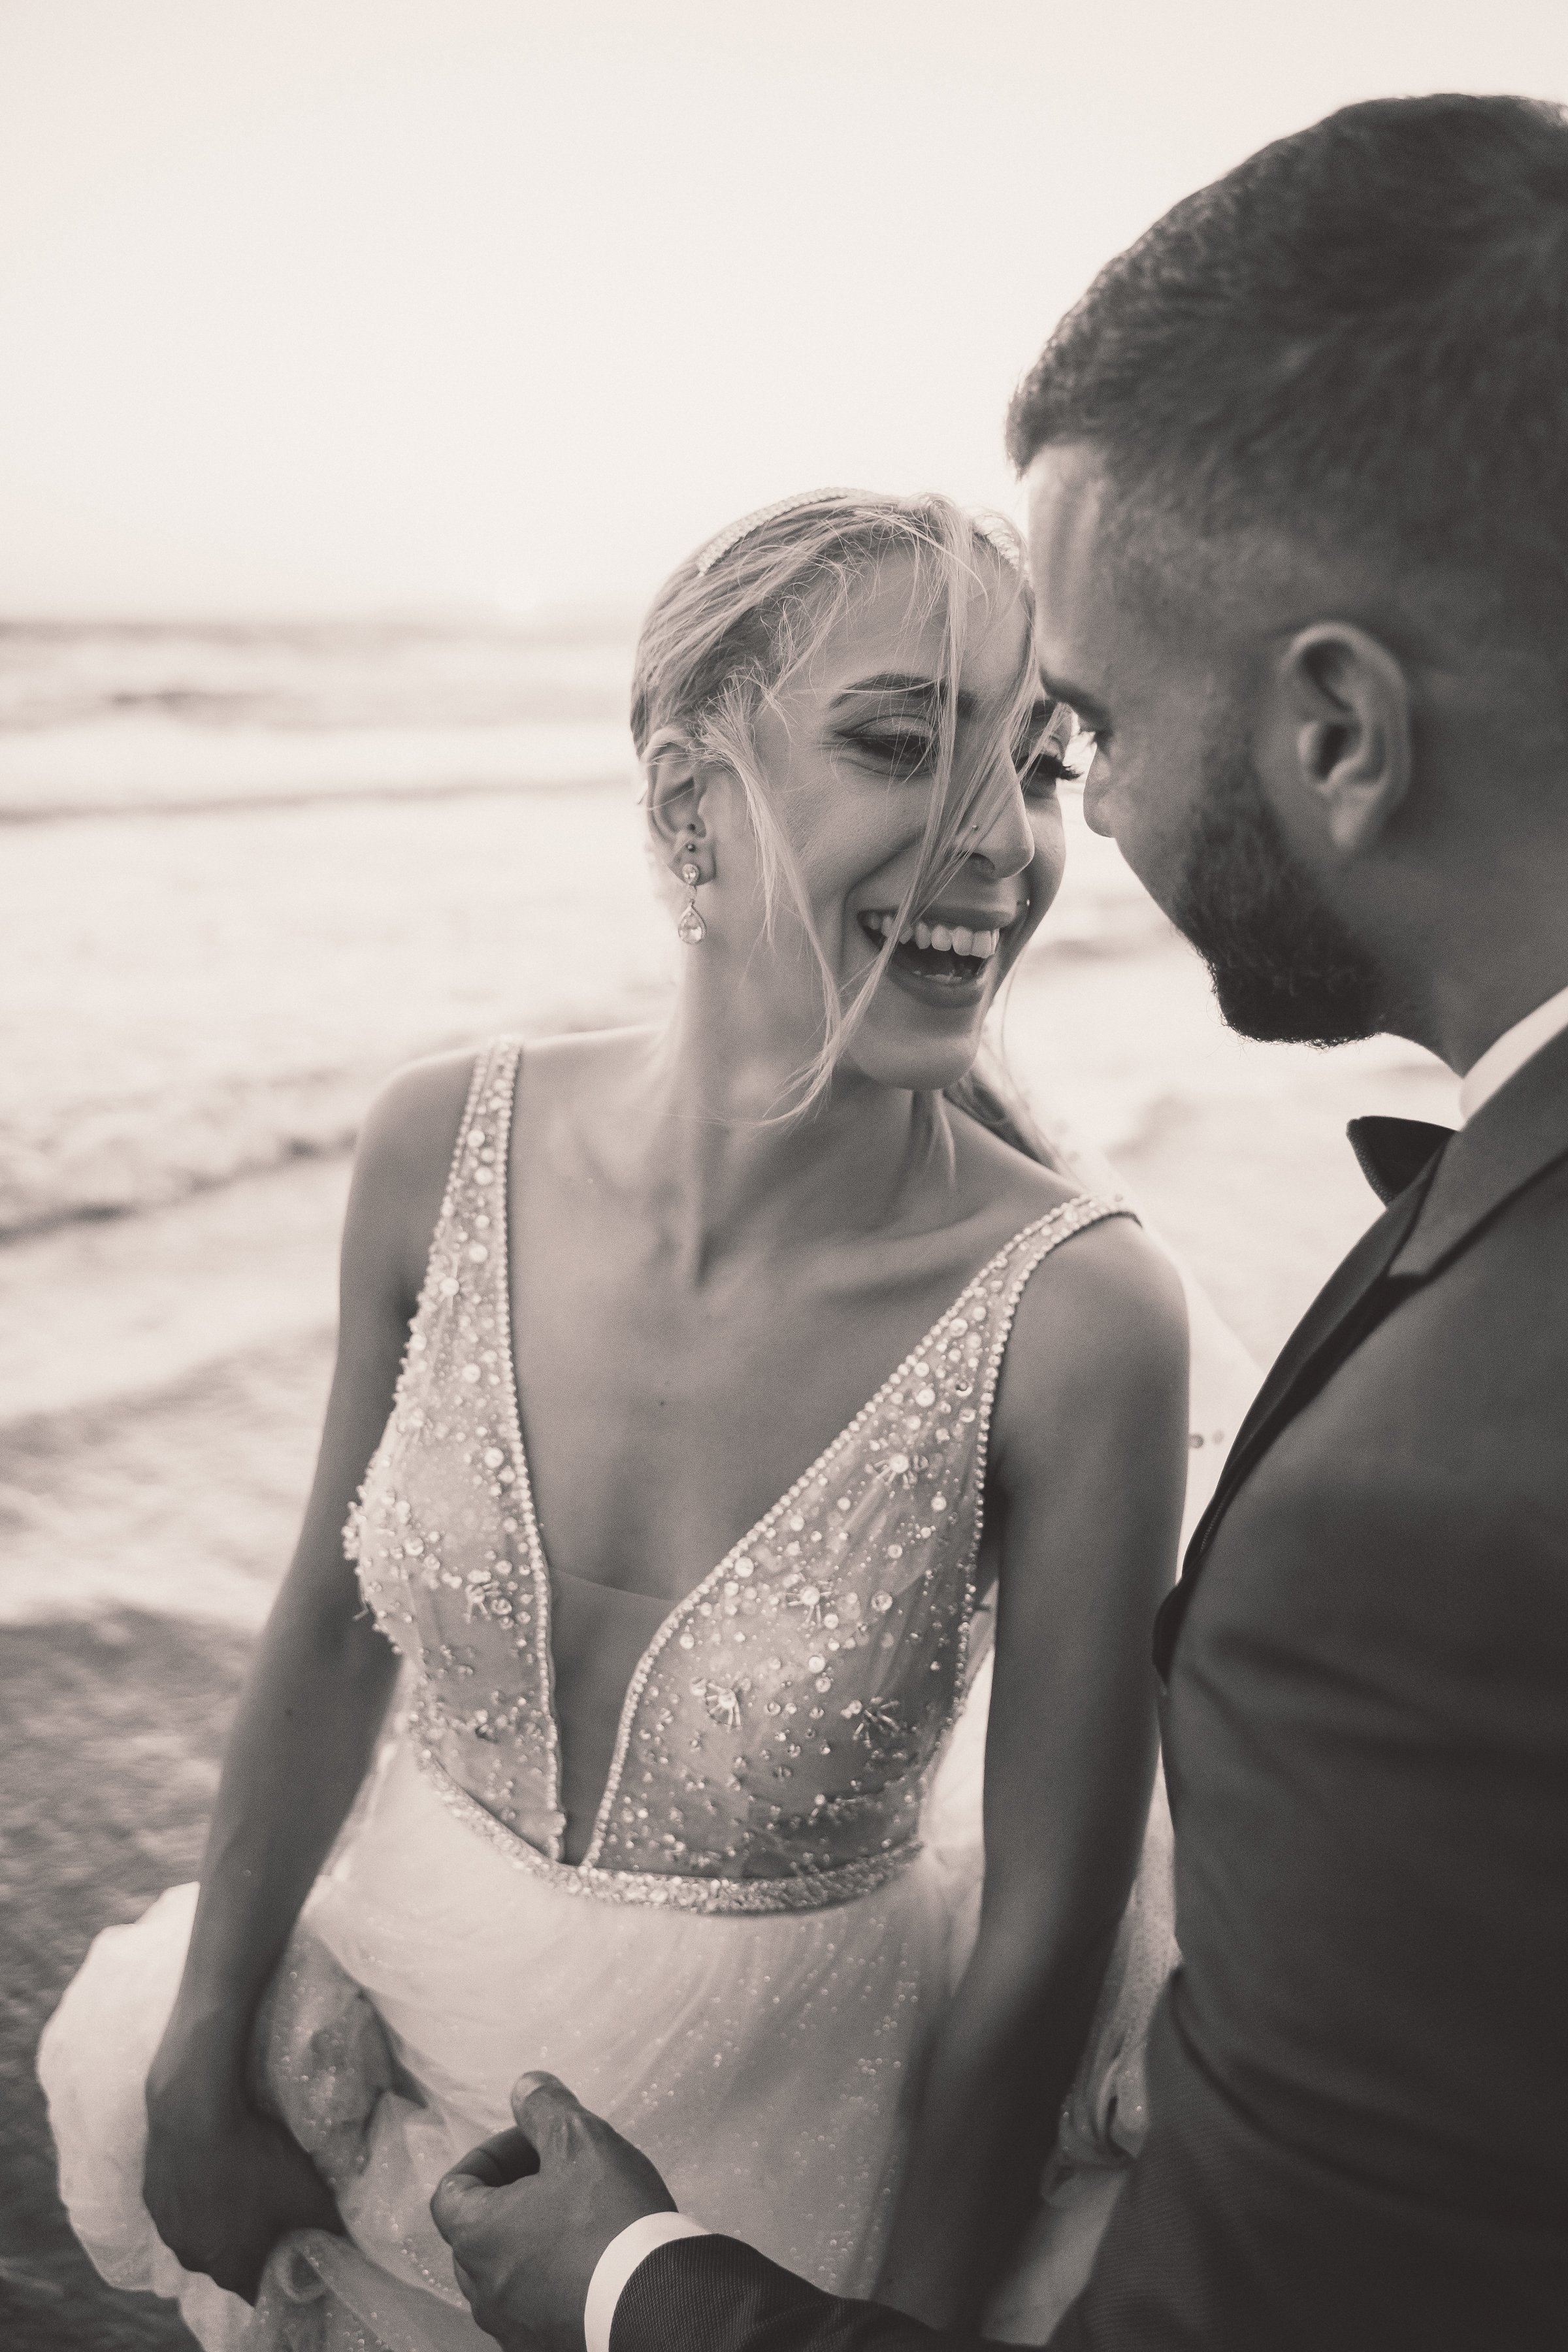 Memorable wedding photography in Cyprus to treasure for a lifetime